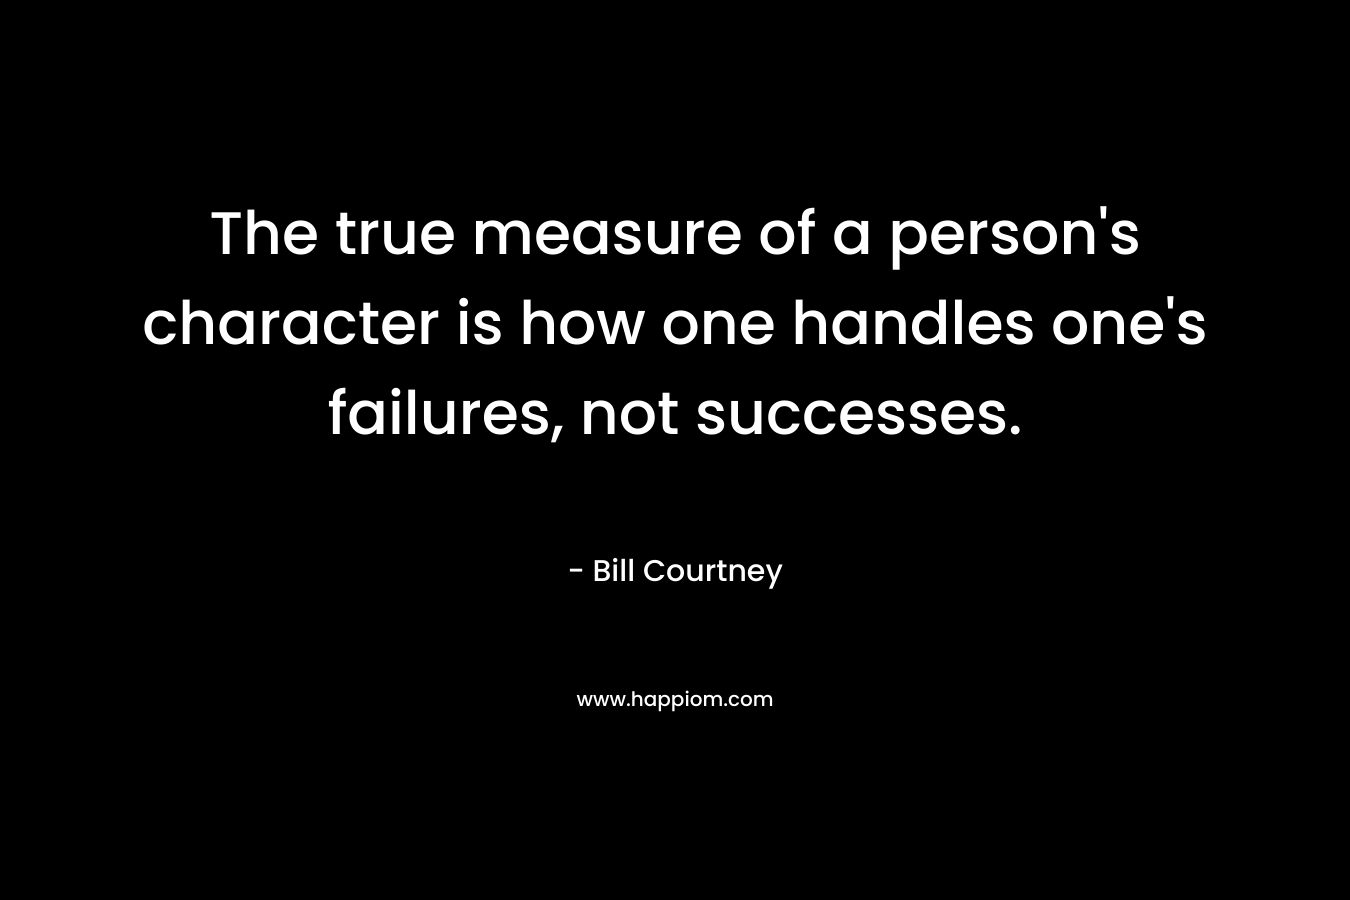 The true measure of a person’s character is how one handles one’s failures, not successes. – Bill Courtney